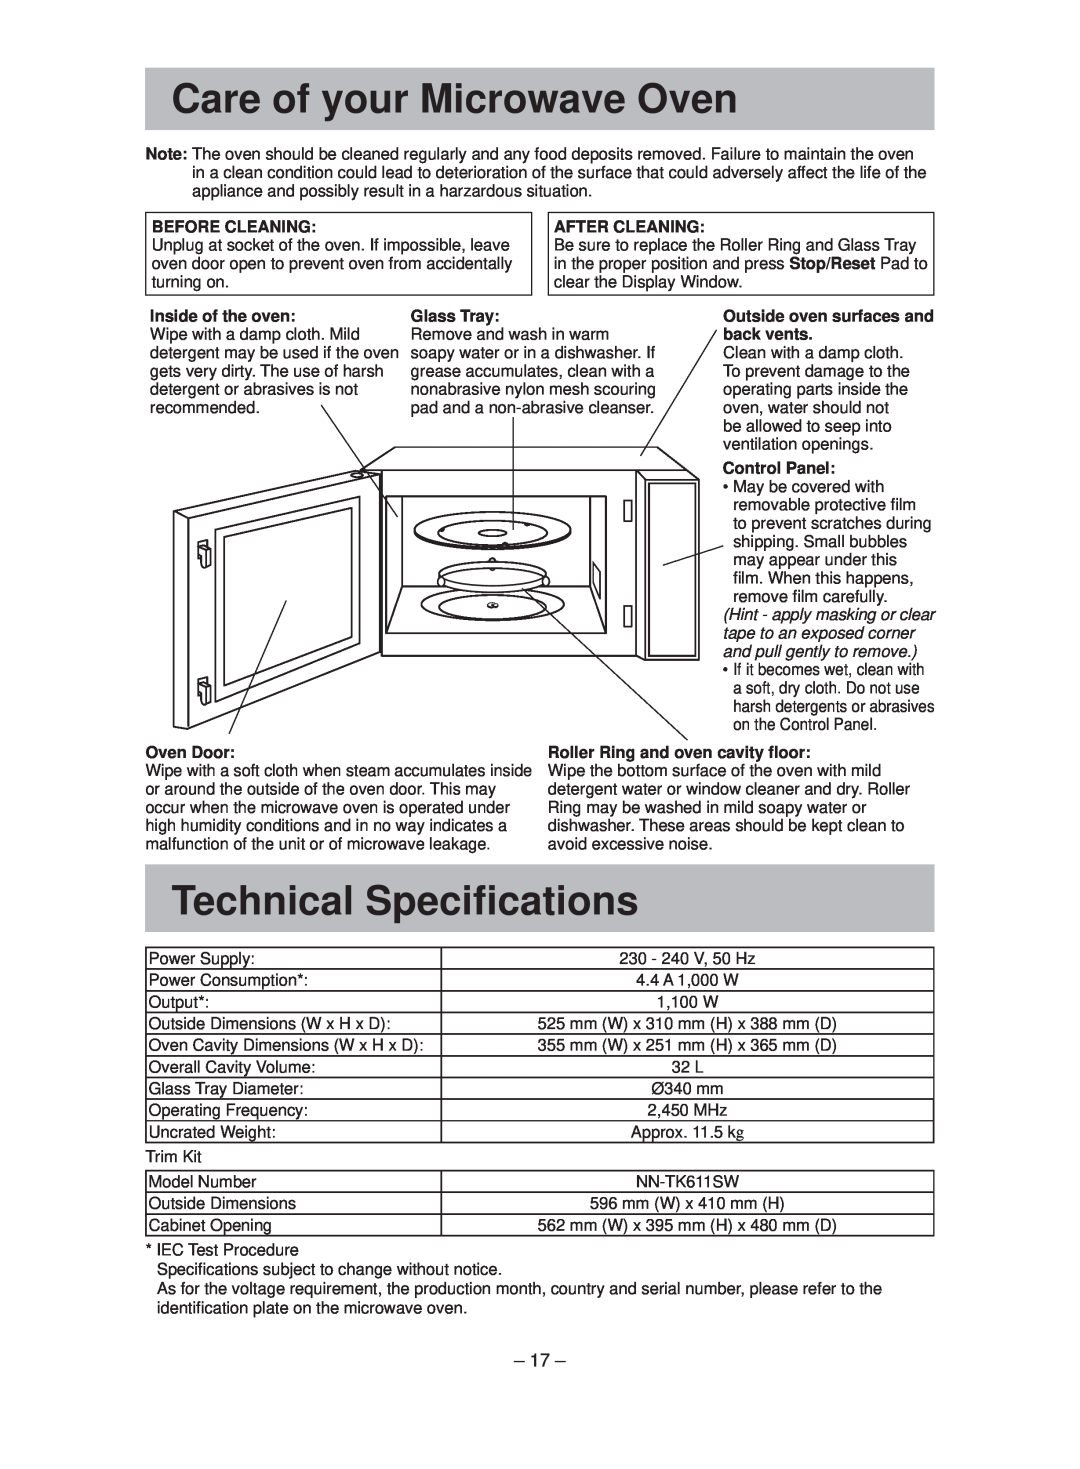 Panasonic NN-ST641W manual Care of your Microwave Oven, Technical Speciﬁcations, tape to an exposed corner 